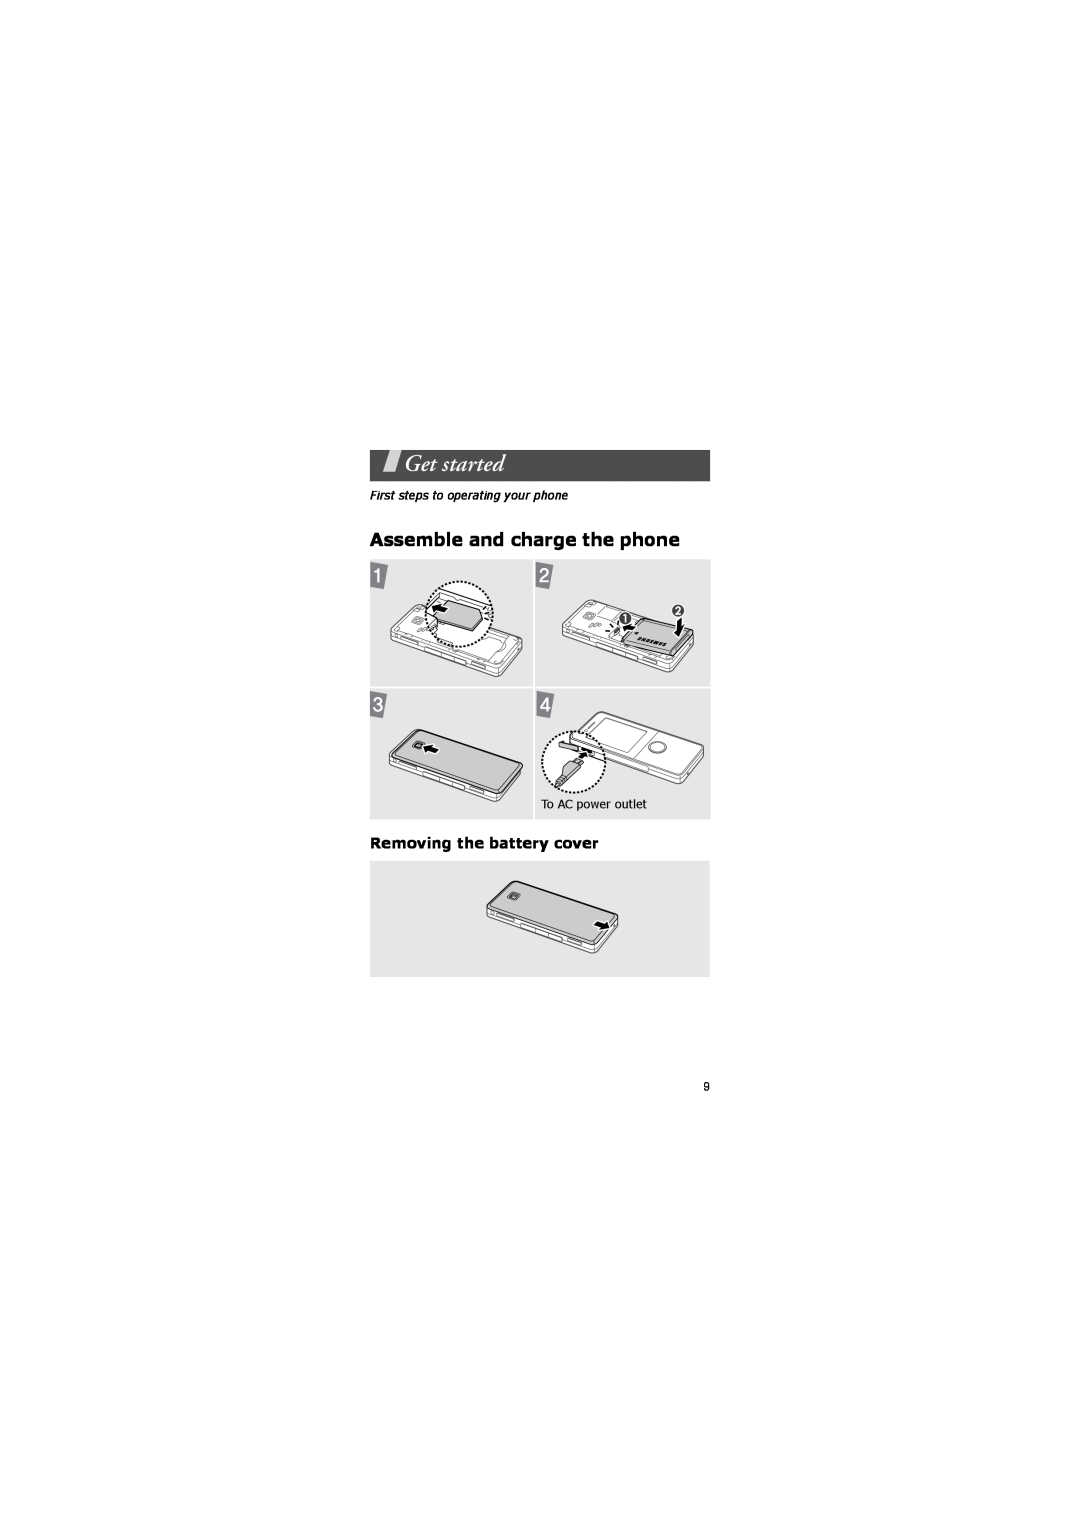 Samsung GH68-20883A manual Get started, Assemble and charge the phone, Removing the battery cover 